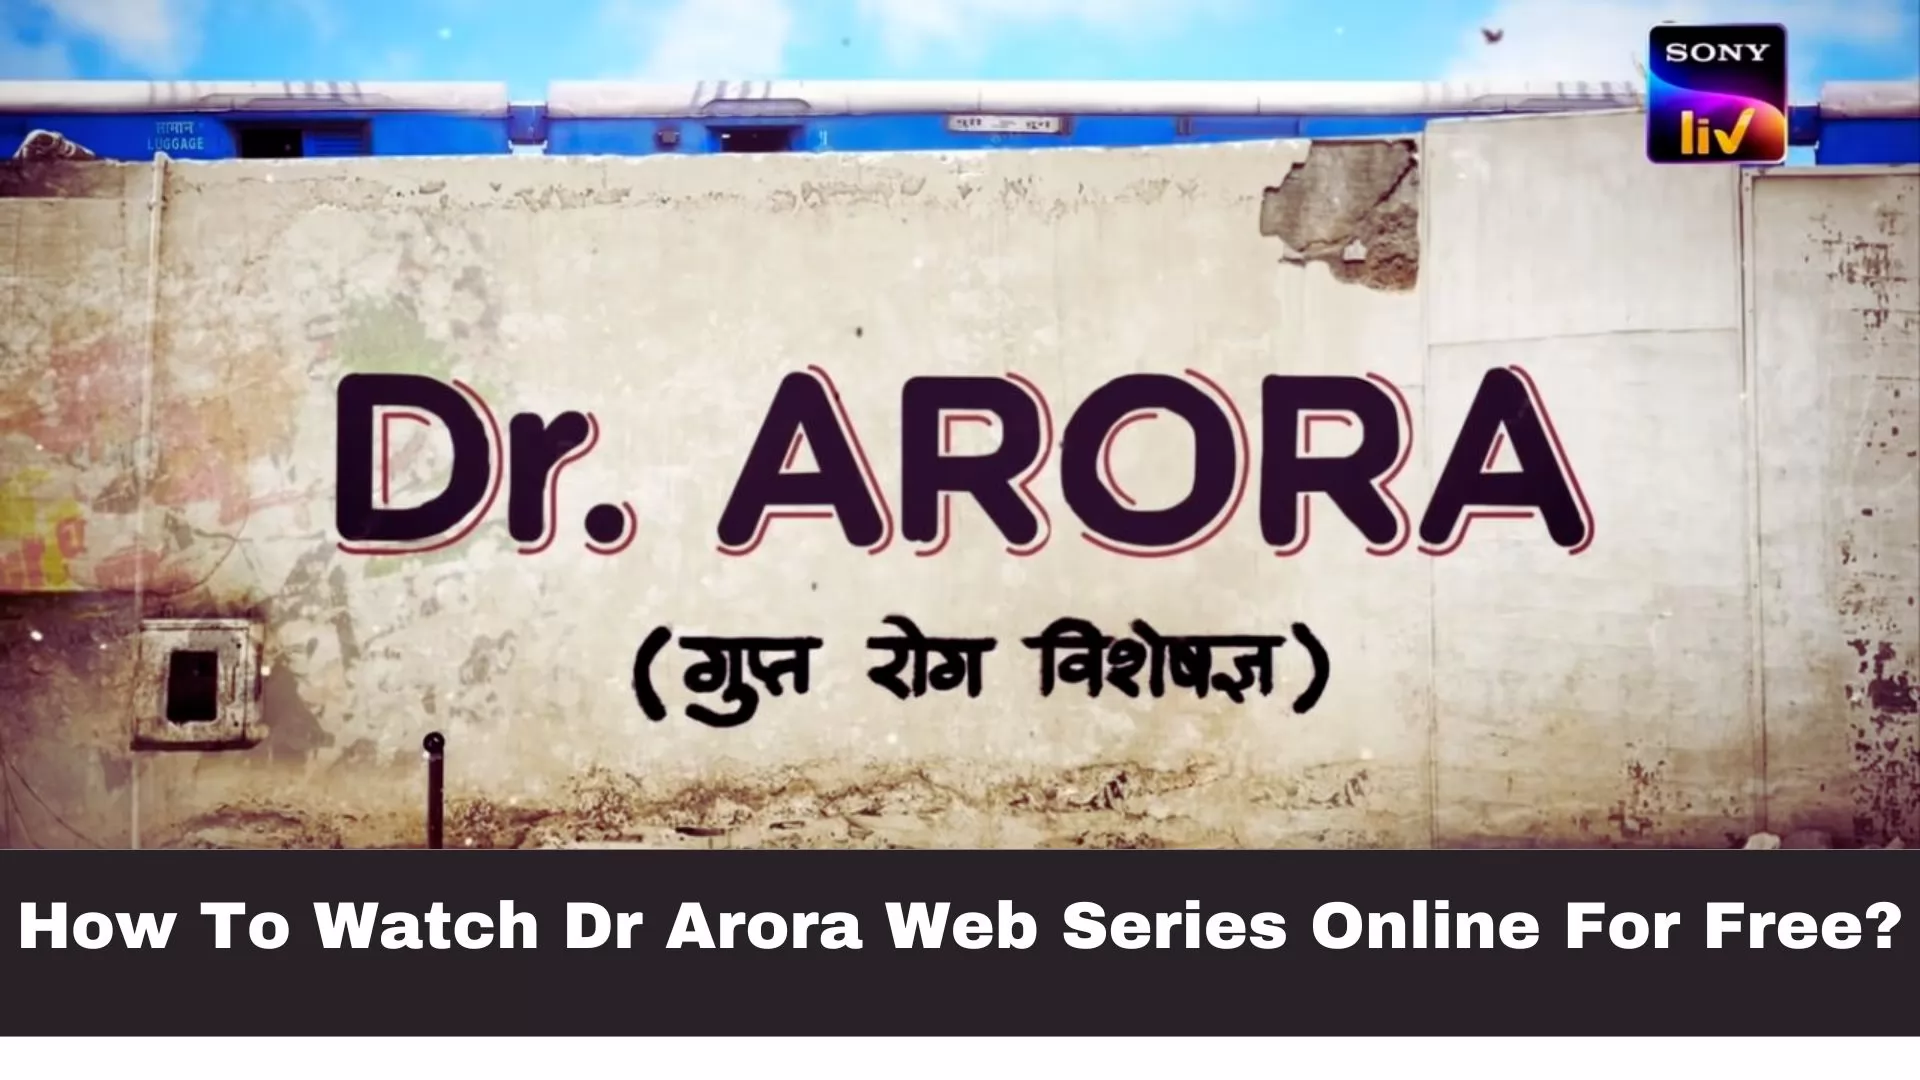 How To Watch Dr Arora Web Series Online For Free?